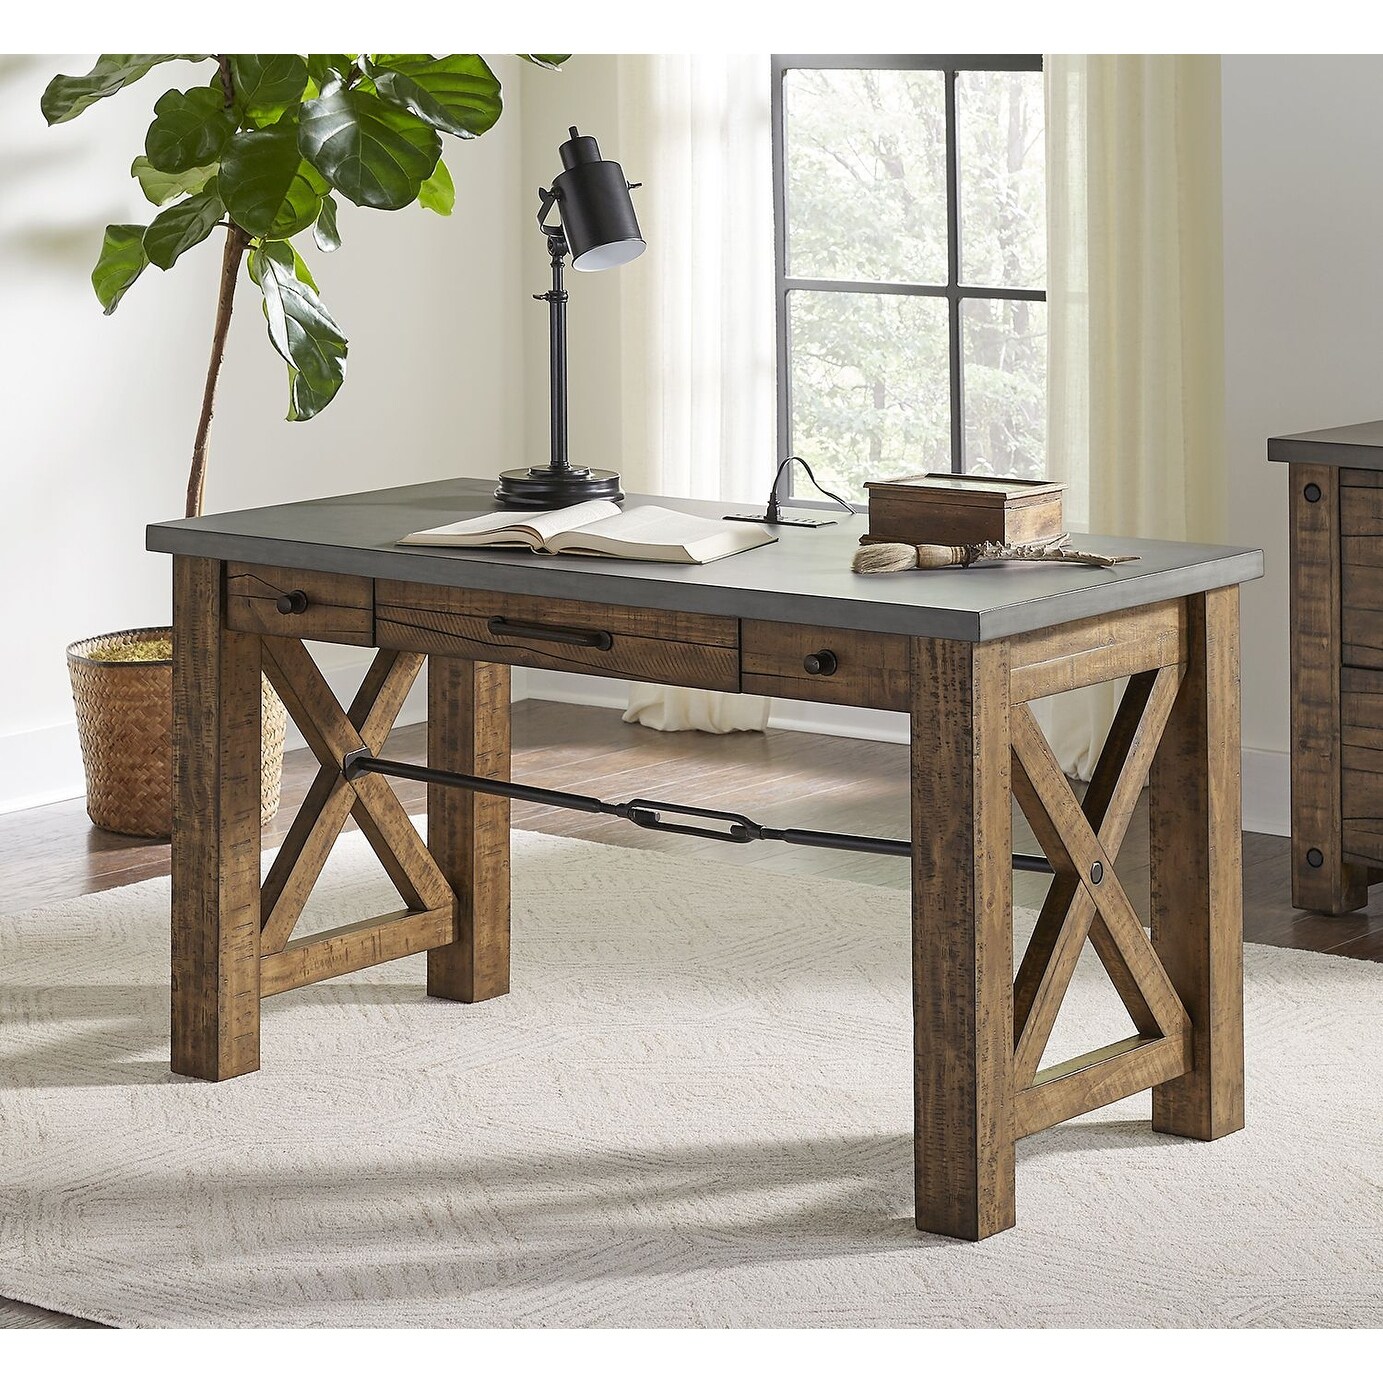 Rustic Writing Desk, Writing Table, Office Desk, Brown With Concrete Top